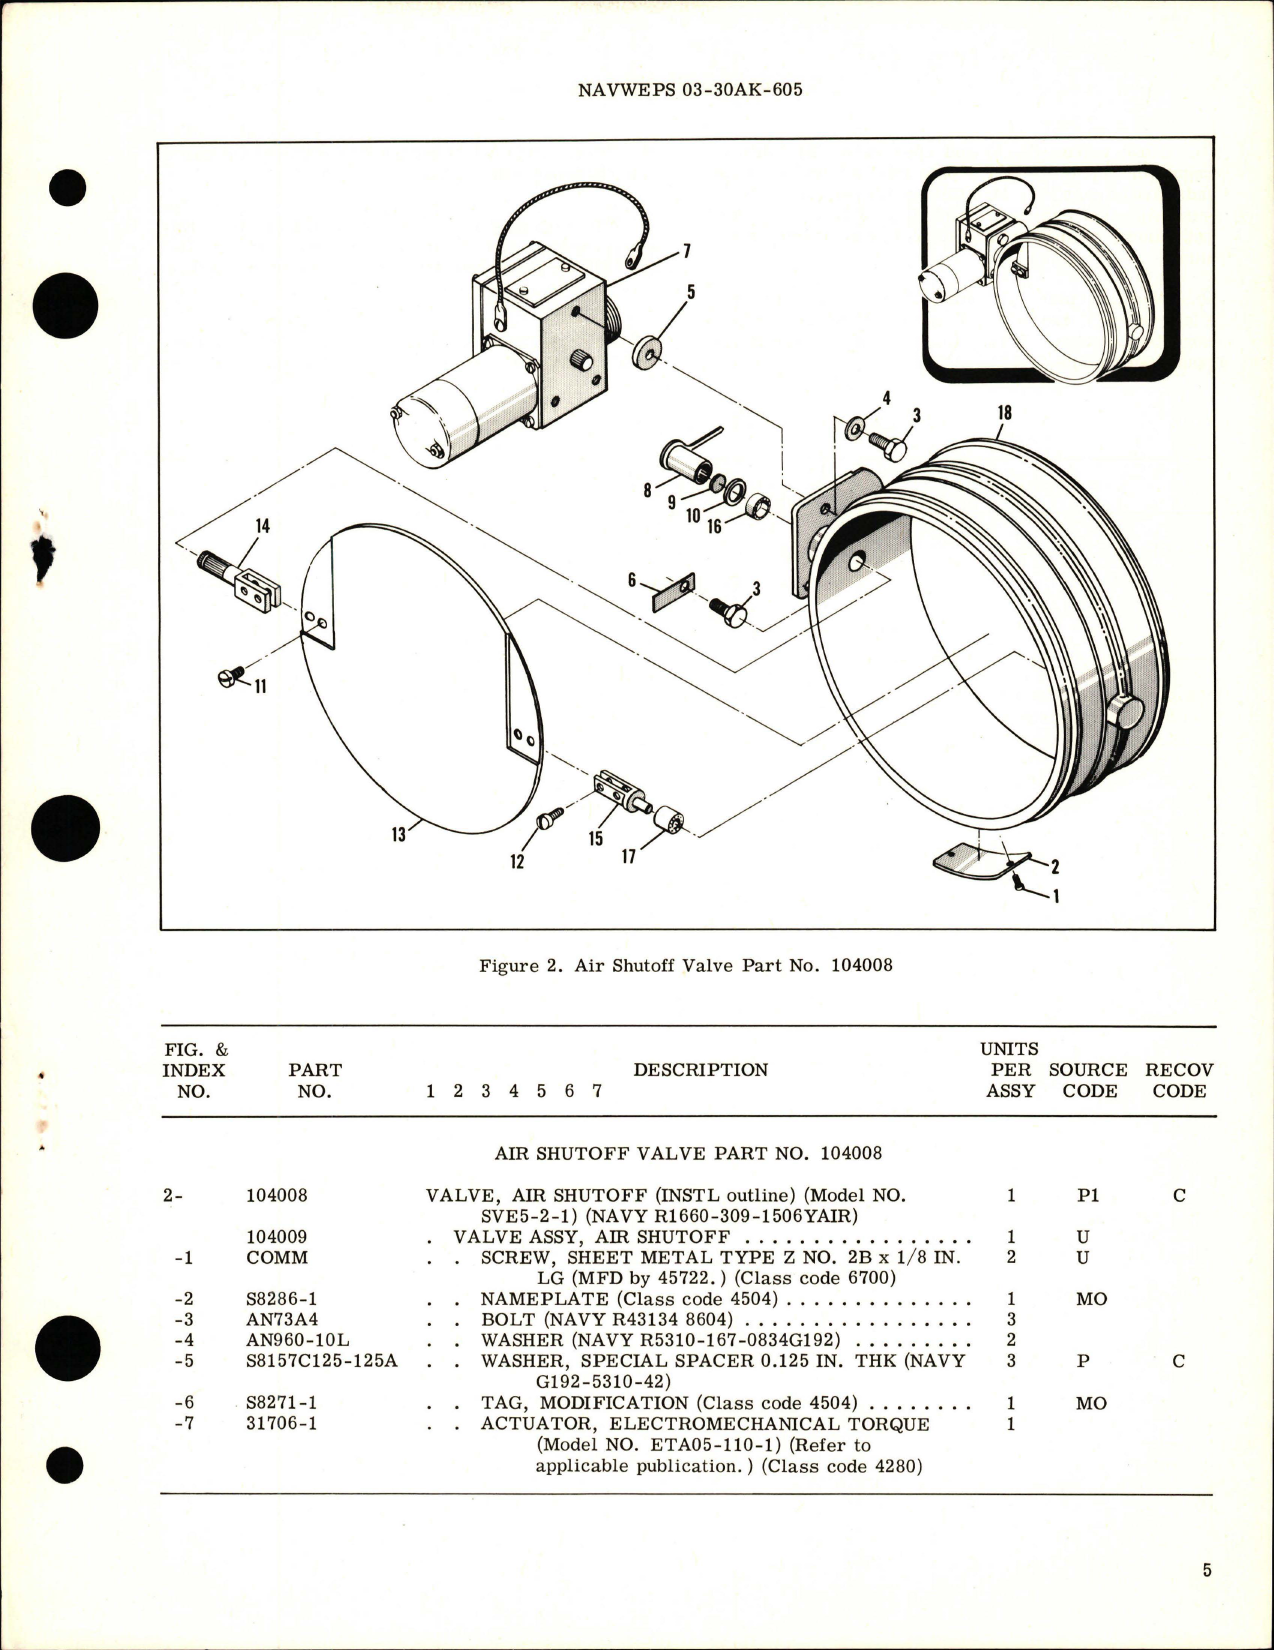 Sample page 5 from AirCorps Library document: Overhaul Instructions with Parts Breakdown for Air Shutoff Valve - Part 104008 